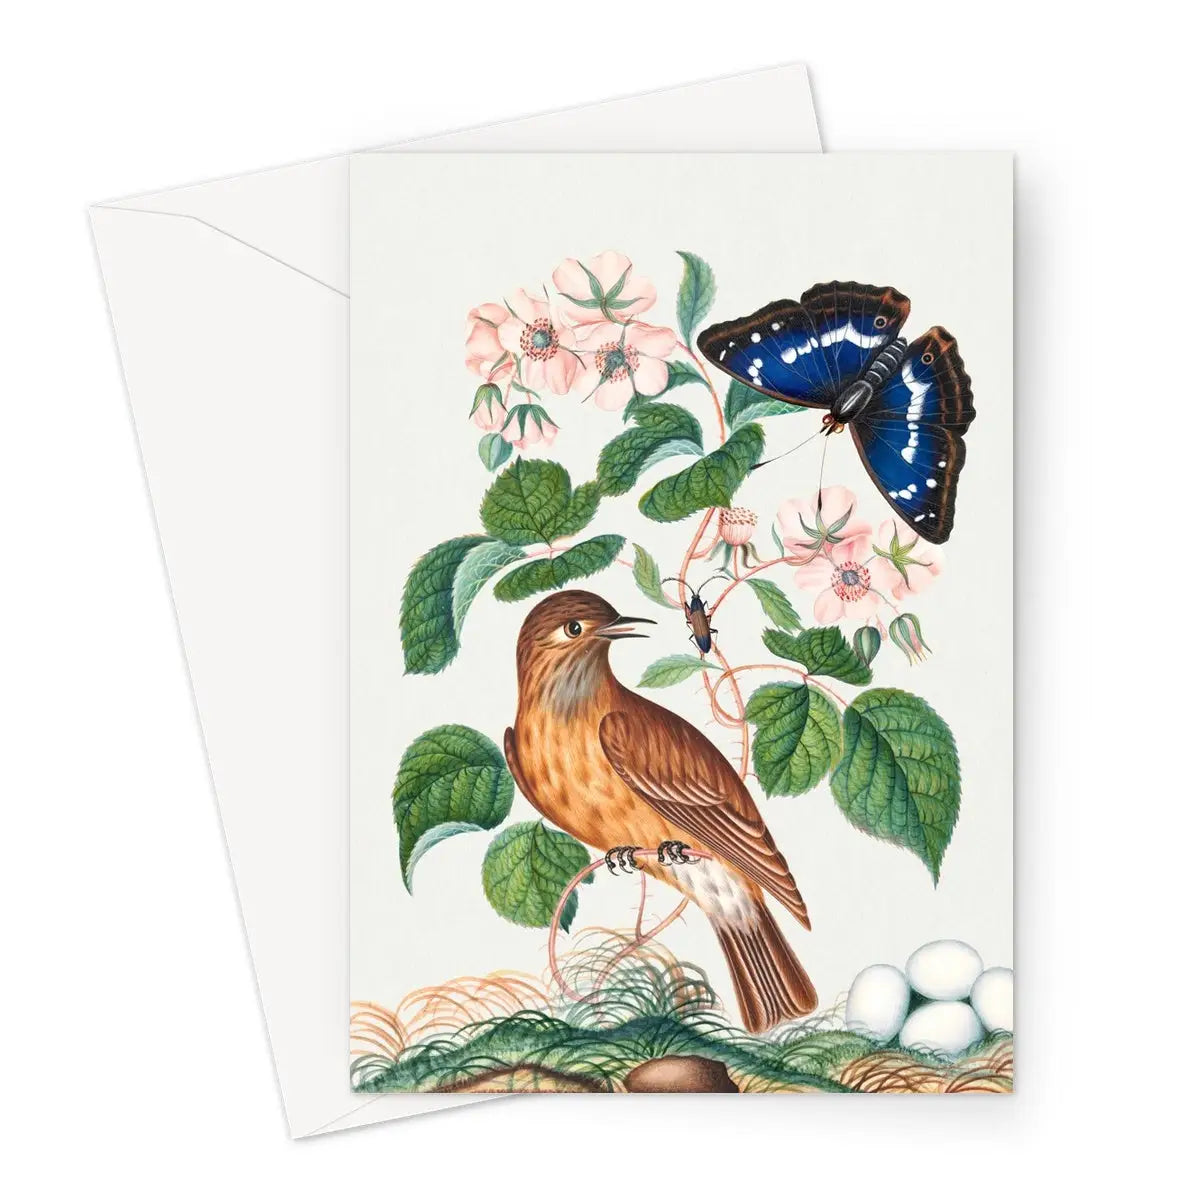 Spotted Flycatcher Purple Emperor And Longhorned Beetle - James Bolton Greeting Card - A5 Portrait / 1 Card - Greeting